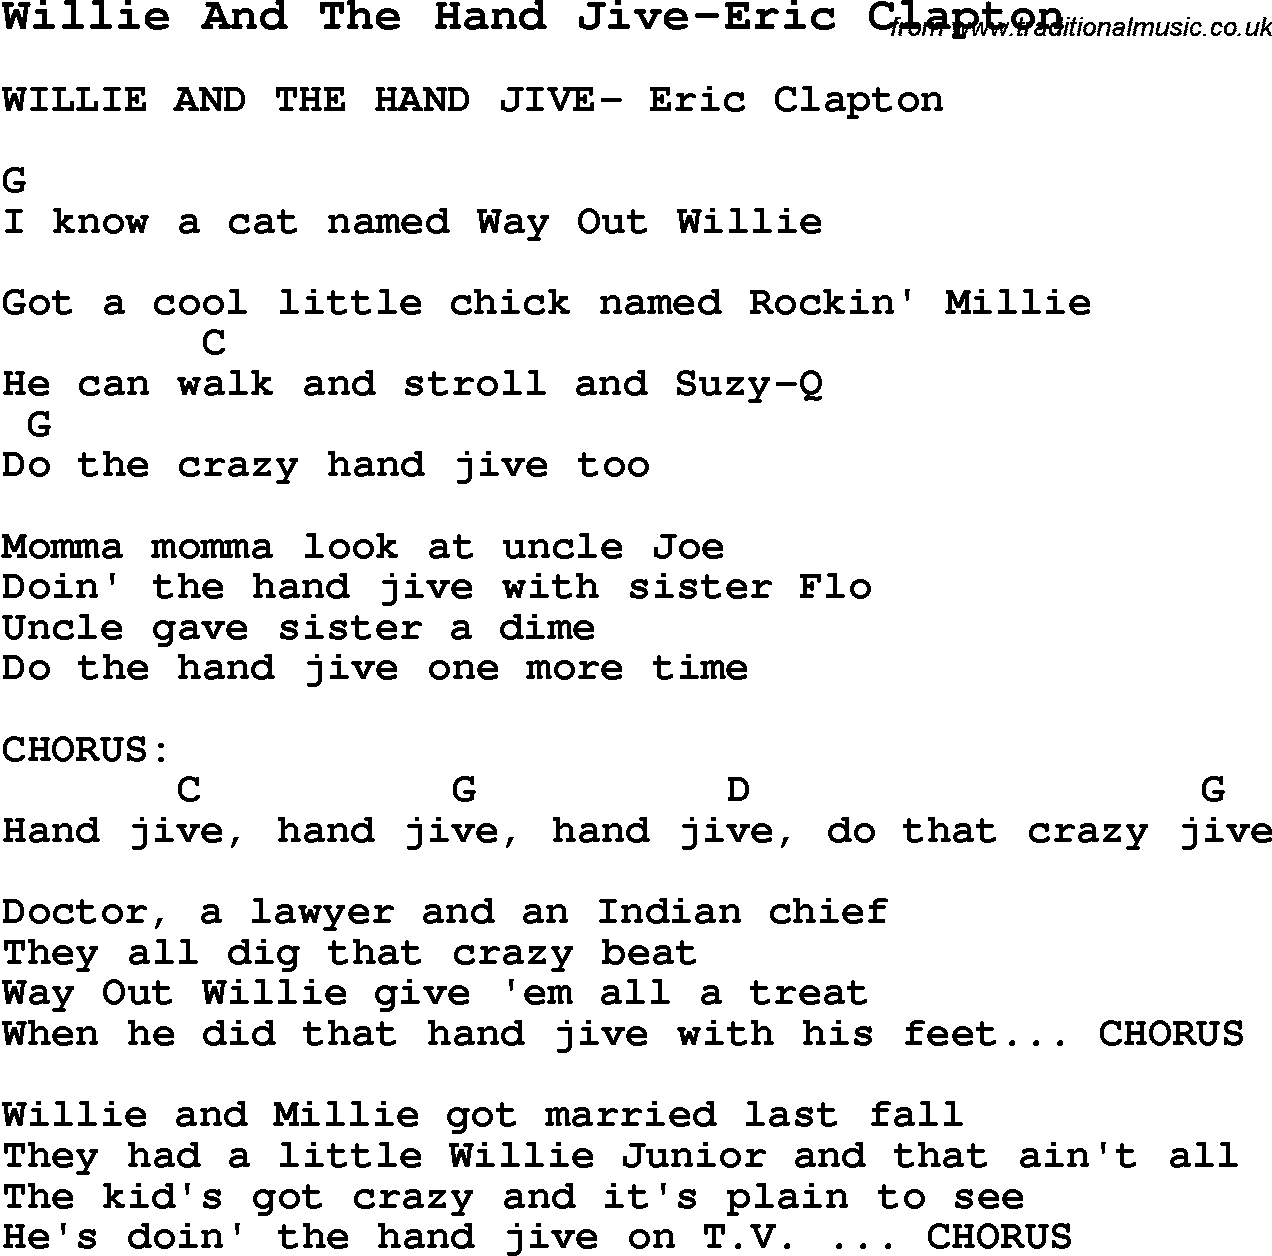 Blues Guitar Song, lyrics, chords, tablature, playing hints for Willie And The Hand Jive-Eric Clapton